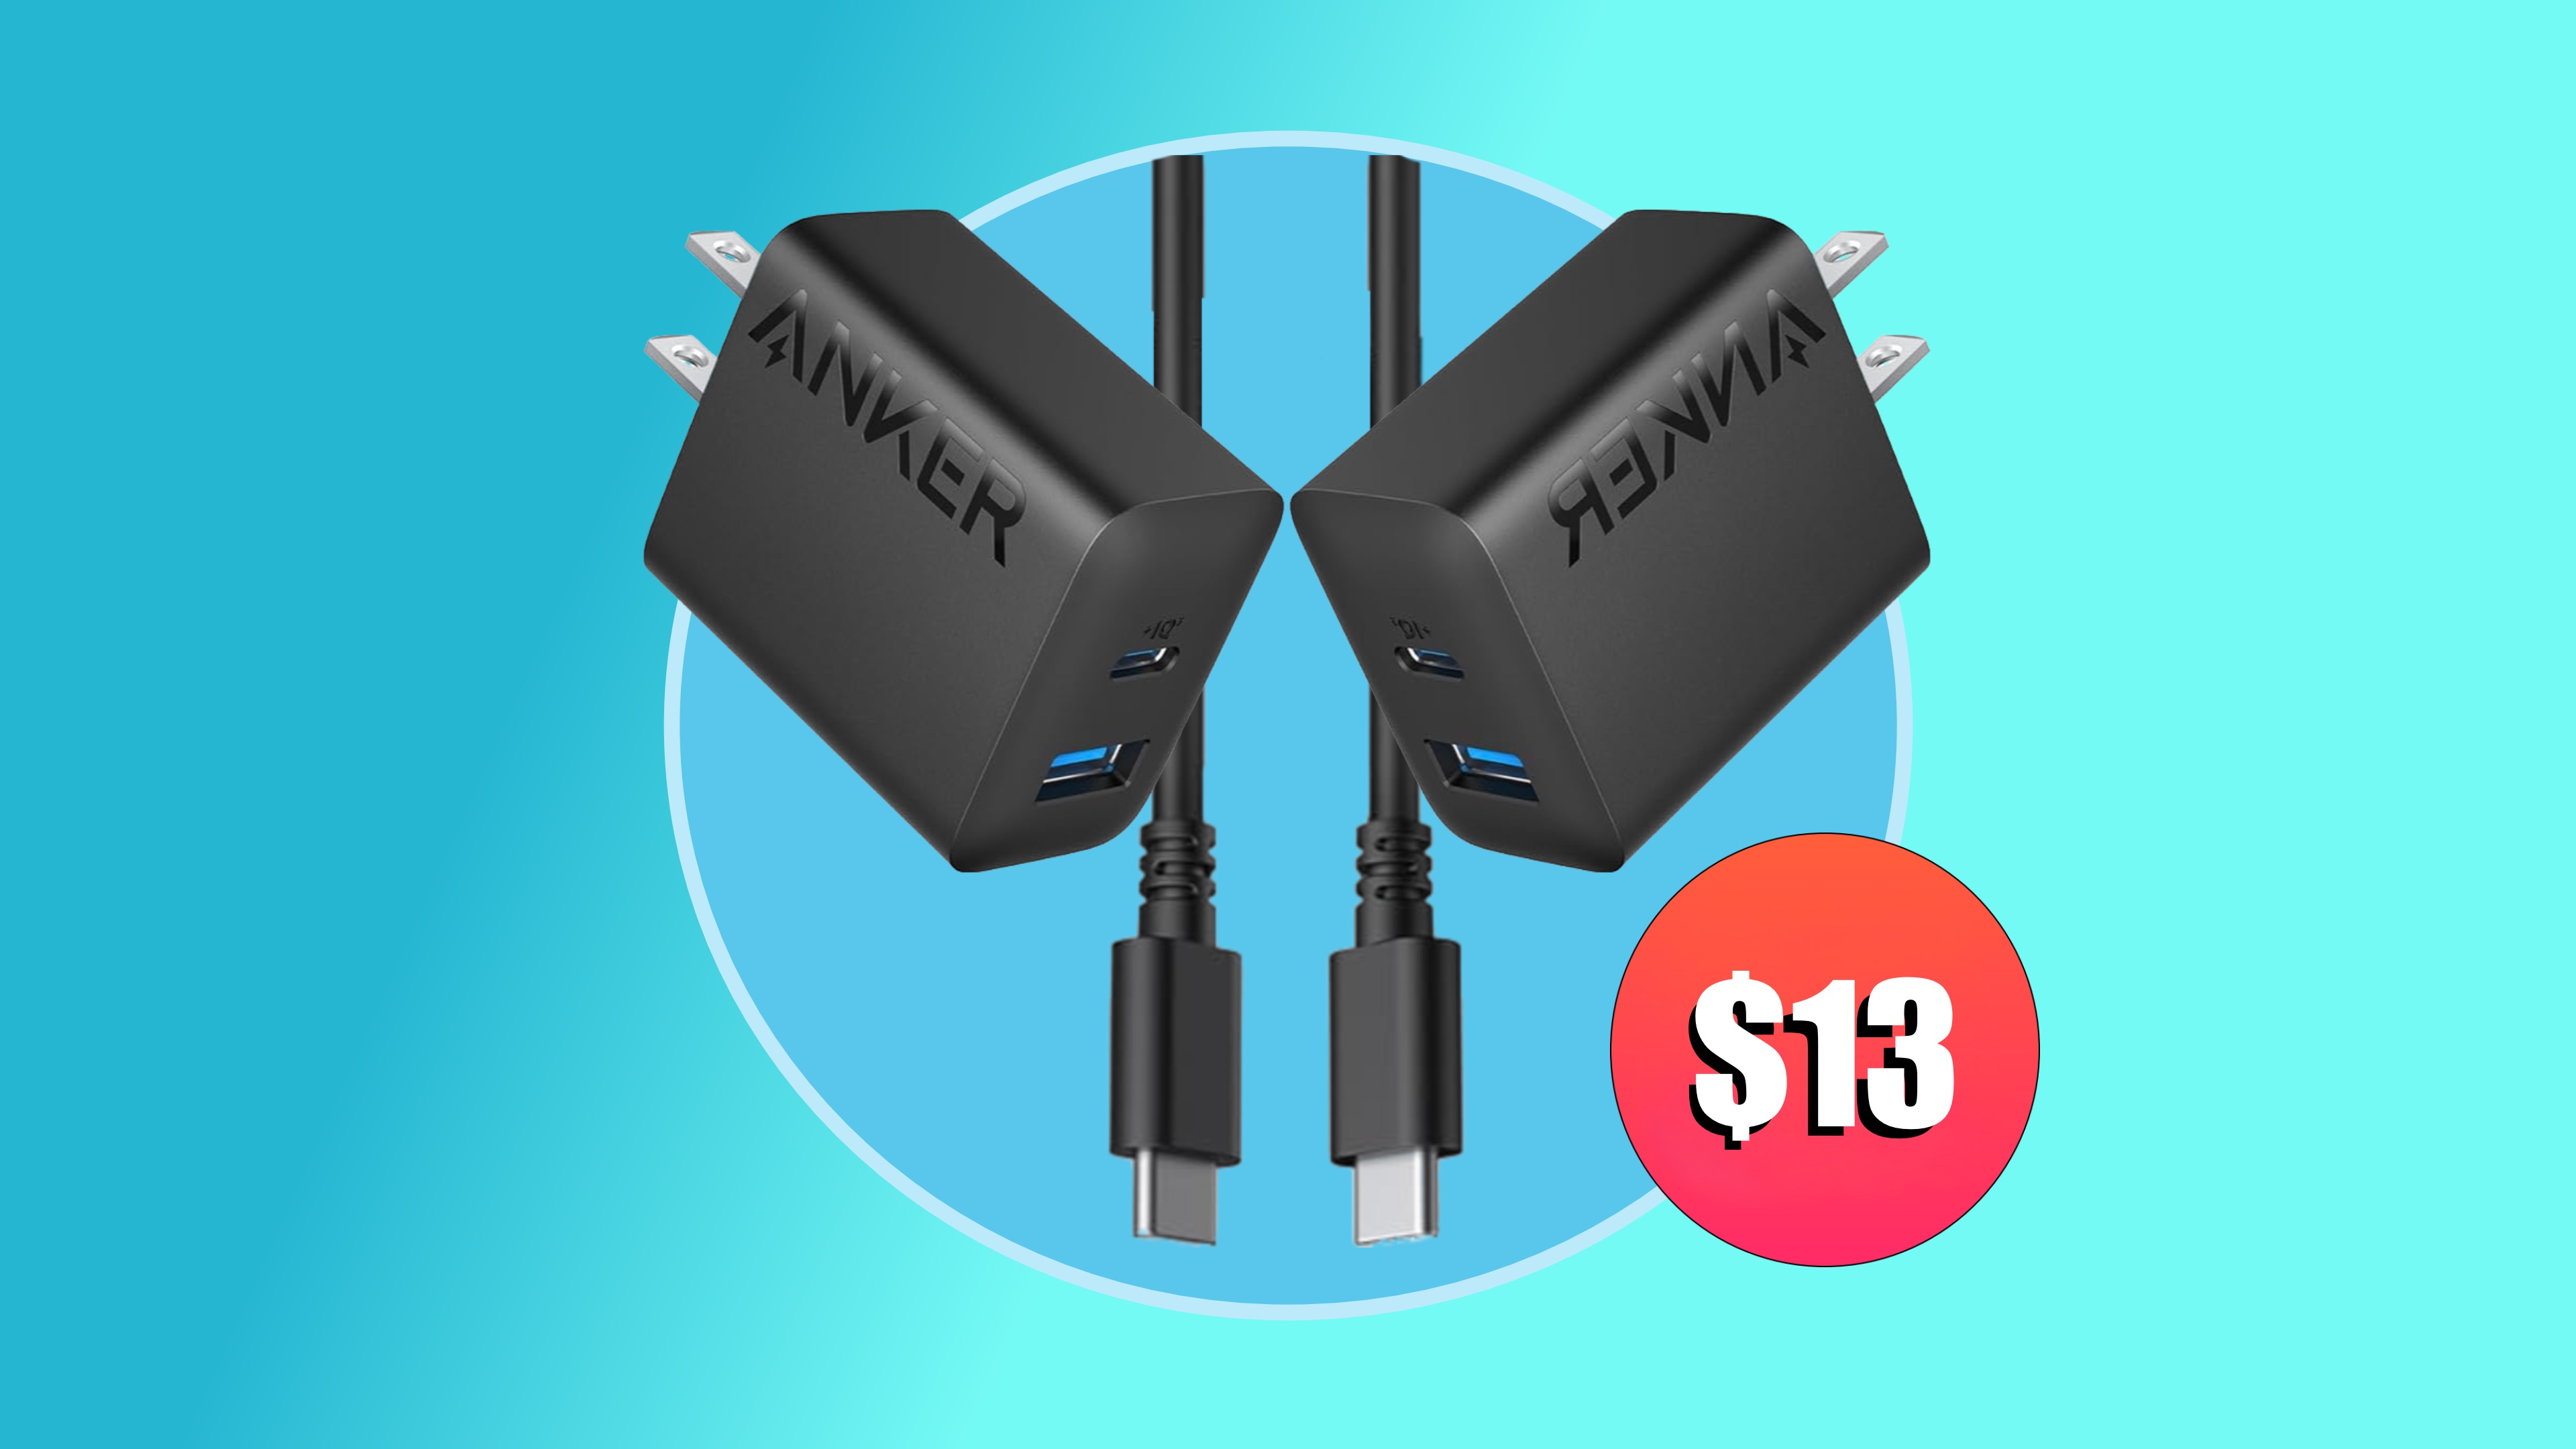 Get 2 Anker 20W USB-C chargers and 2 5-foot USB-C cables for just $13